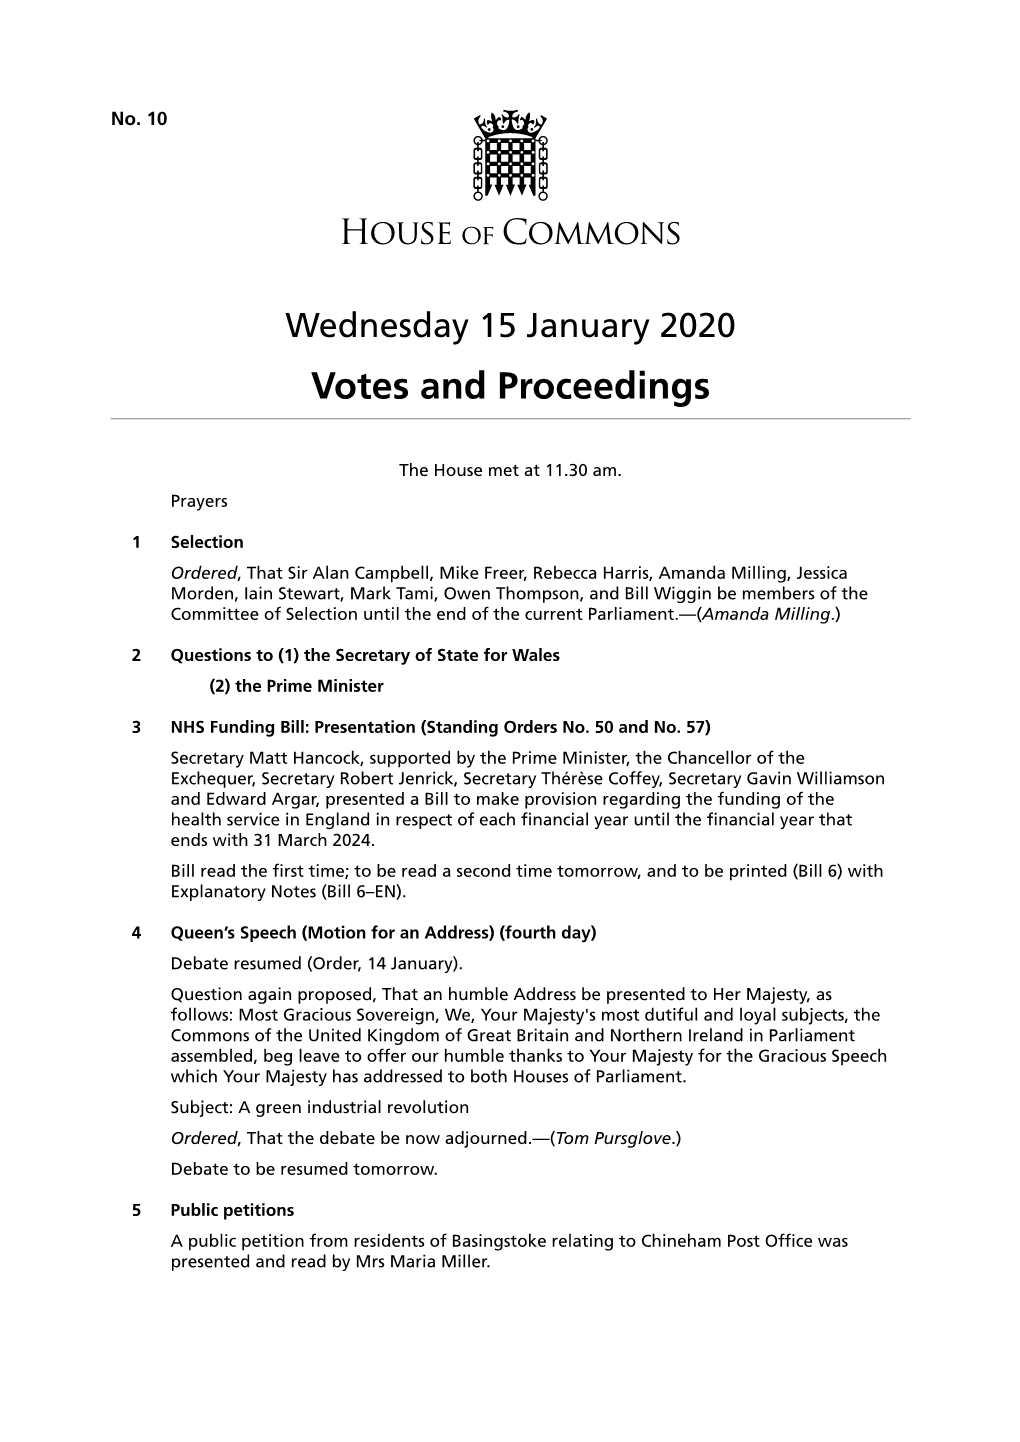 Votes and Proceedings for 15 Jan 2020